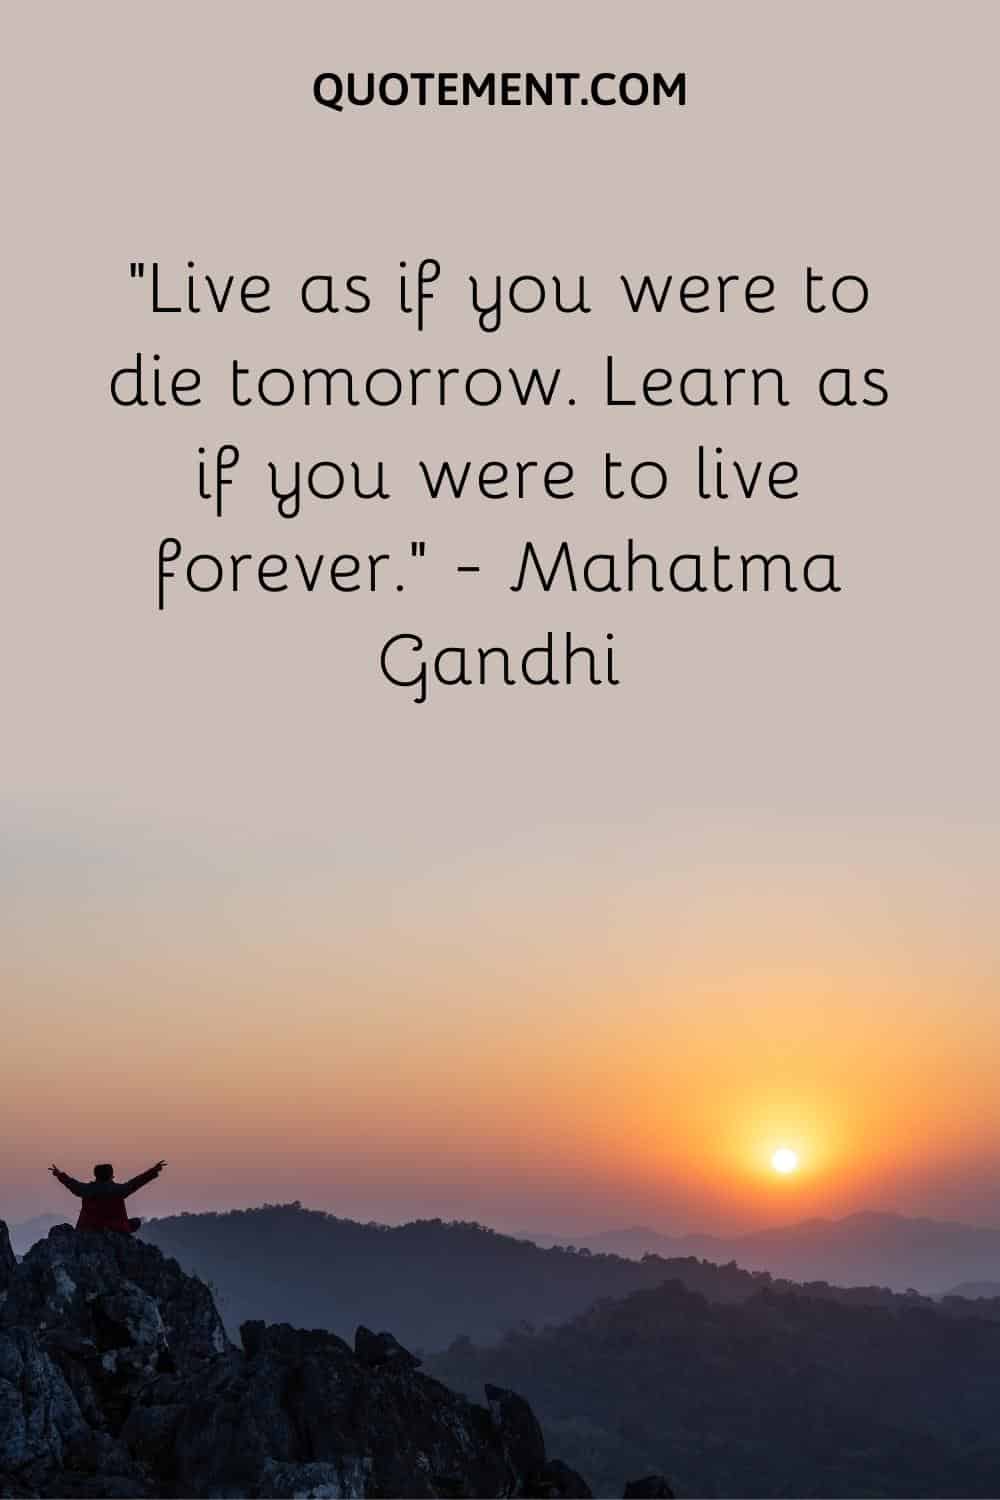 Live as if you were to die tomorrow. Learn as if you were to live forever